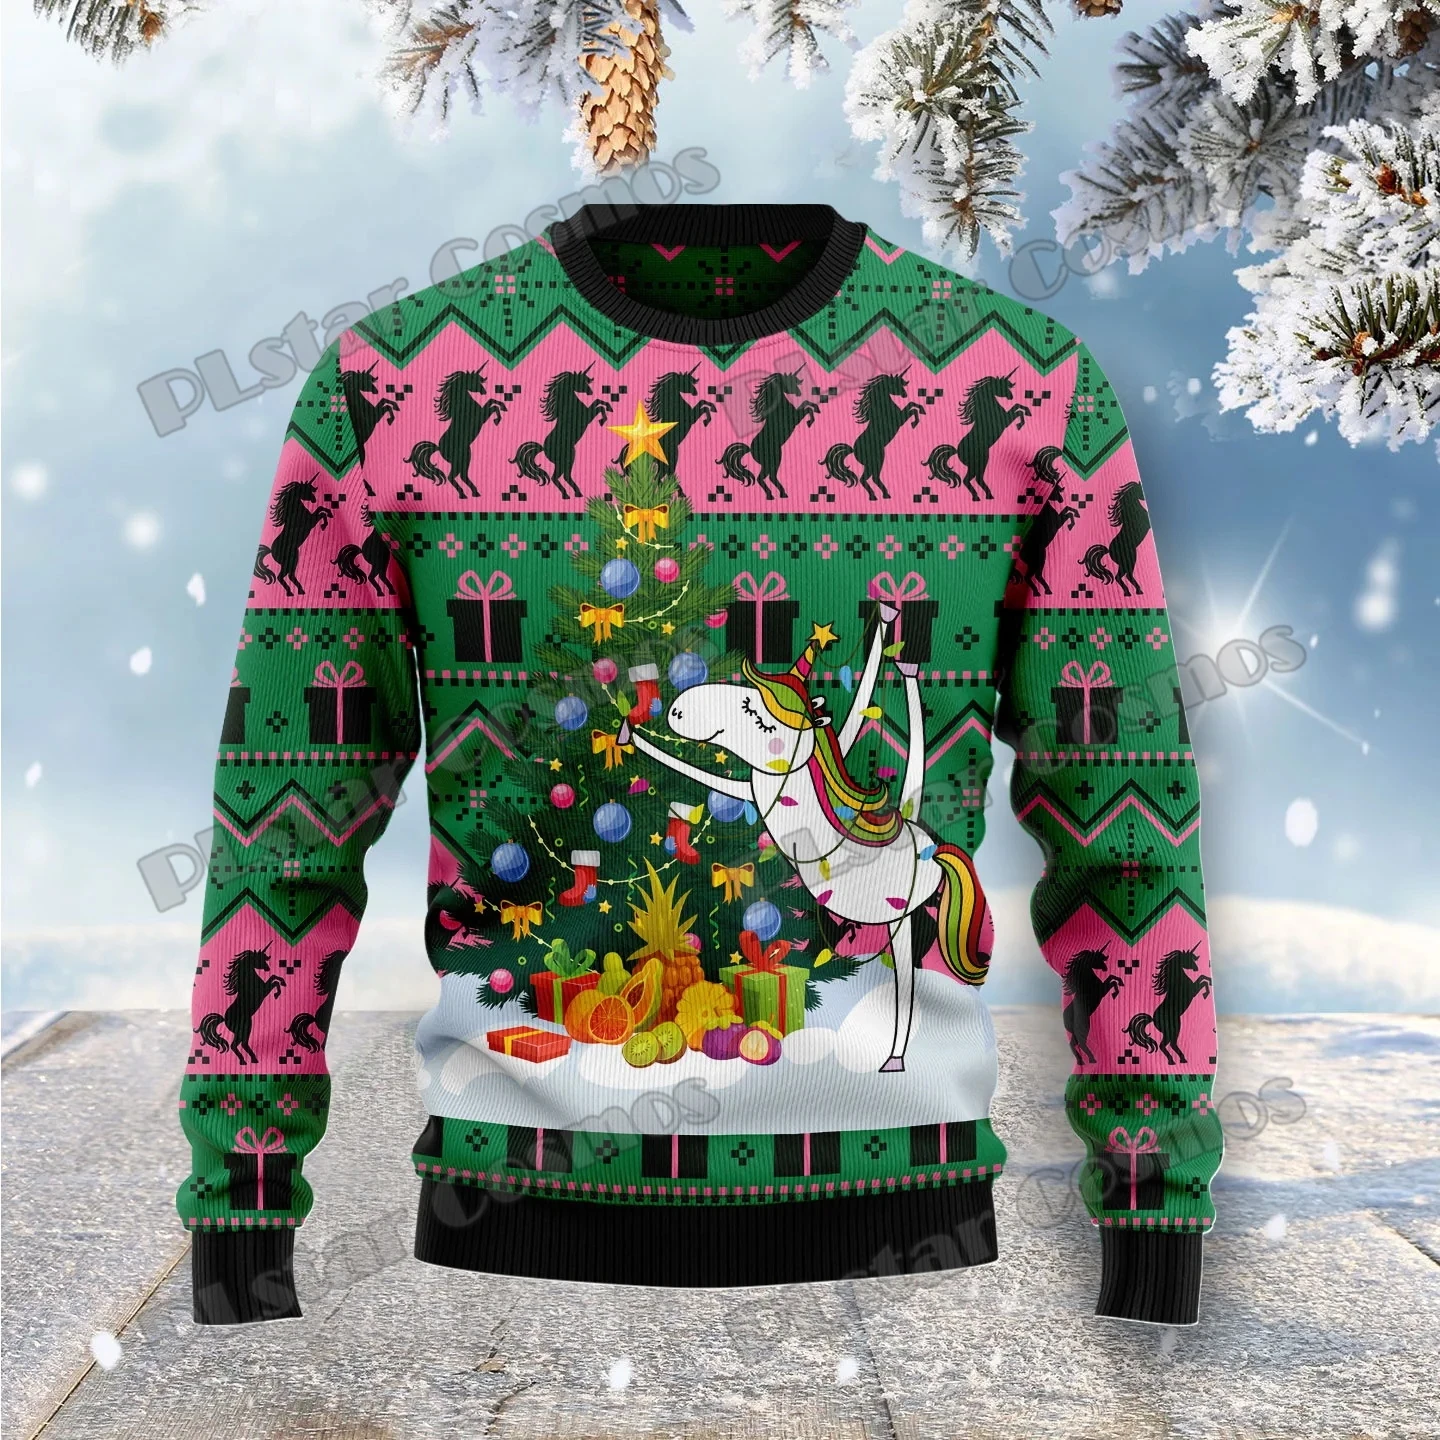 PLstar Cosmos Christmas Tree Unicorn 3D Printed Men's Ugly Christmas Sweater Winter Unisex Casual Knit Pullover Sweater ZZM33